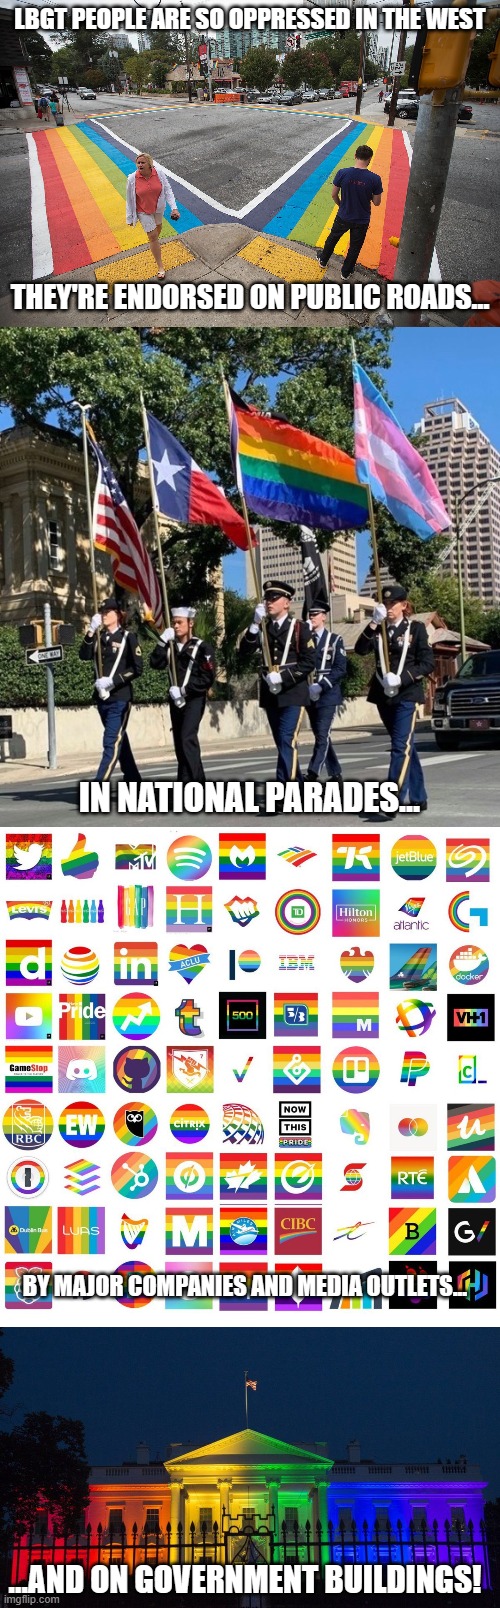 You call THAT oppressed!? | LBGT PEOPLE ARE SO OPPRESSED IN THE WEST; THEY'RE ENDORSED ON PUBLIC ROADS... IN NATIONAL PARADES... BY MAJOR COMPANIES AND MEDIA OUTLETS... ...AND ON GOVERNMENT BUILDINGS! | image tagged in memes,gay rights,lgbt,agenda | made w/ Imgflip meme maker